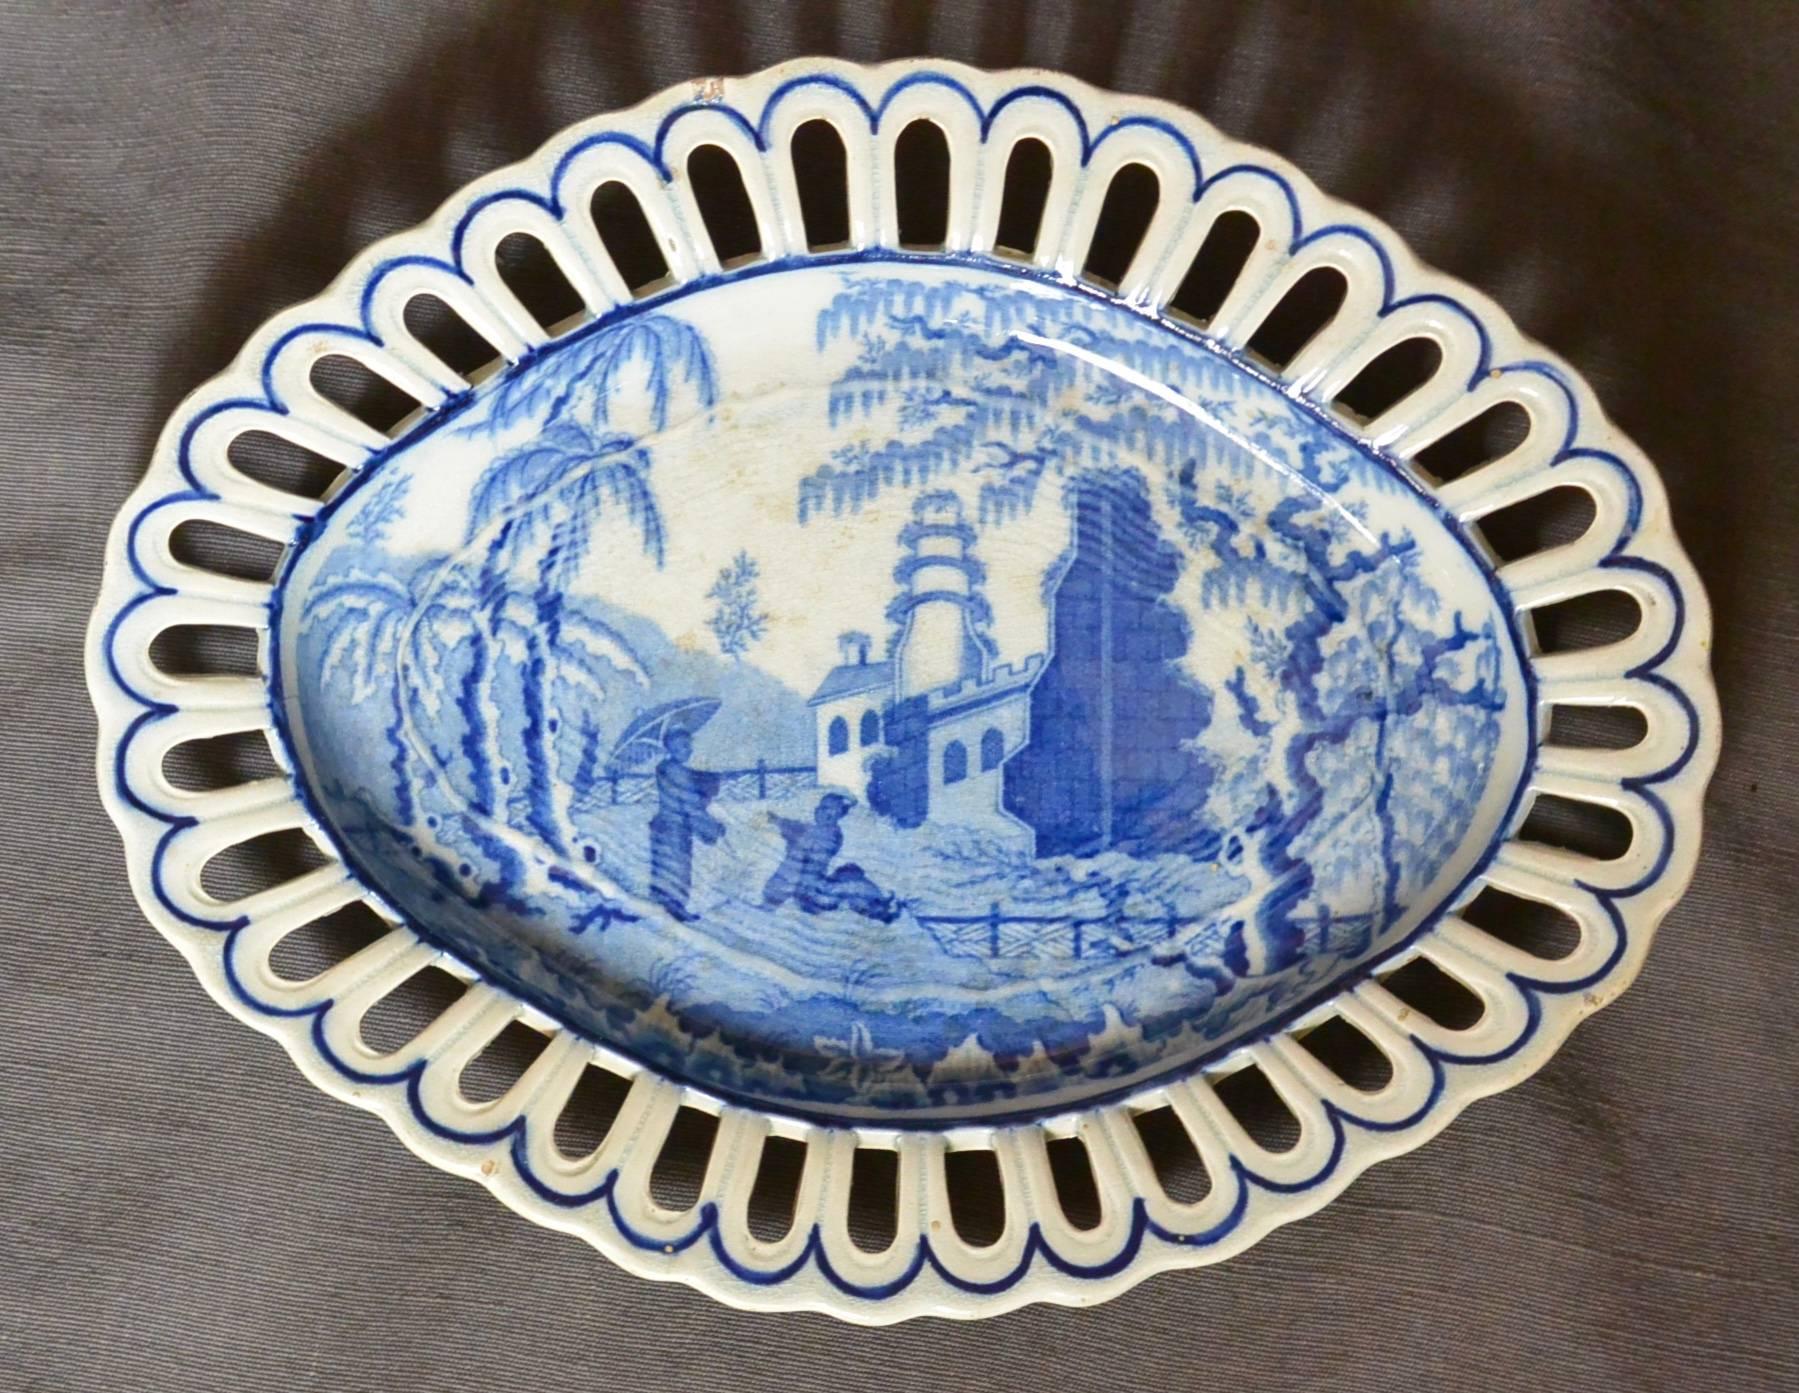 English blue and white chinoiserie plate.  Davenport Staffordshire oval plate in the "Chinoiserie Ruins" pattern with reticulated border. Ex-museum collection. England, circa 1810.
Dimensions: 10" L x 7.75" W x 1.13" D.